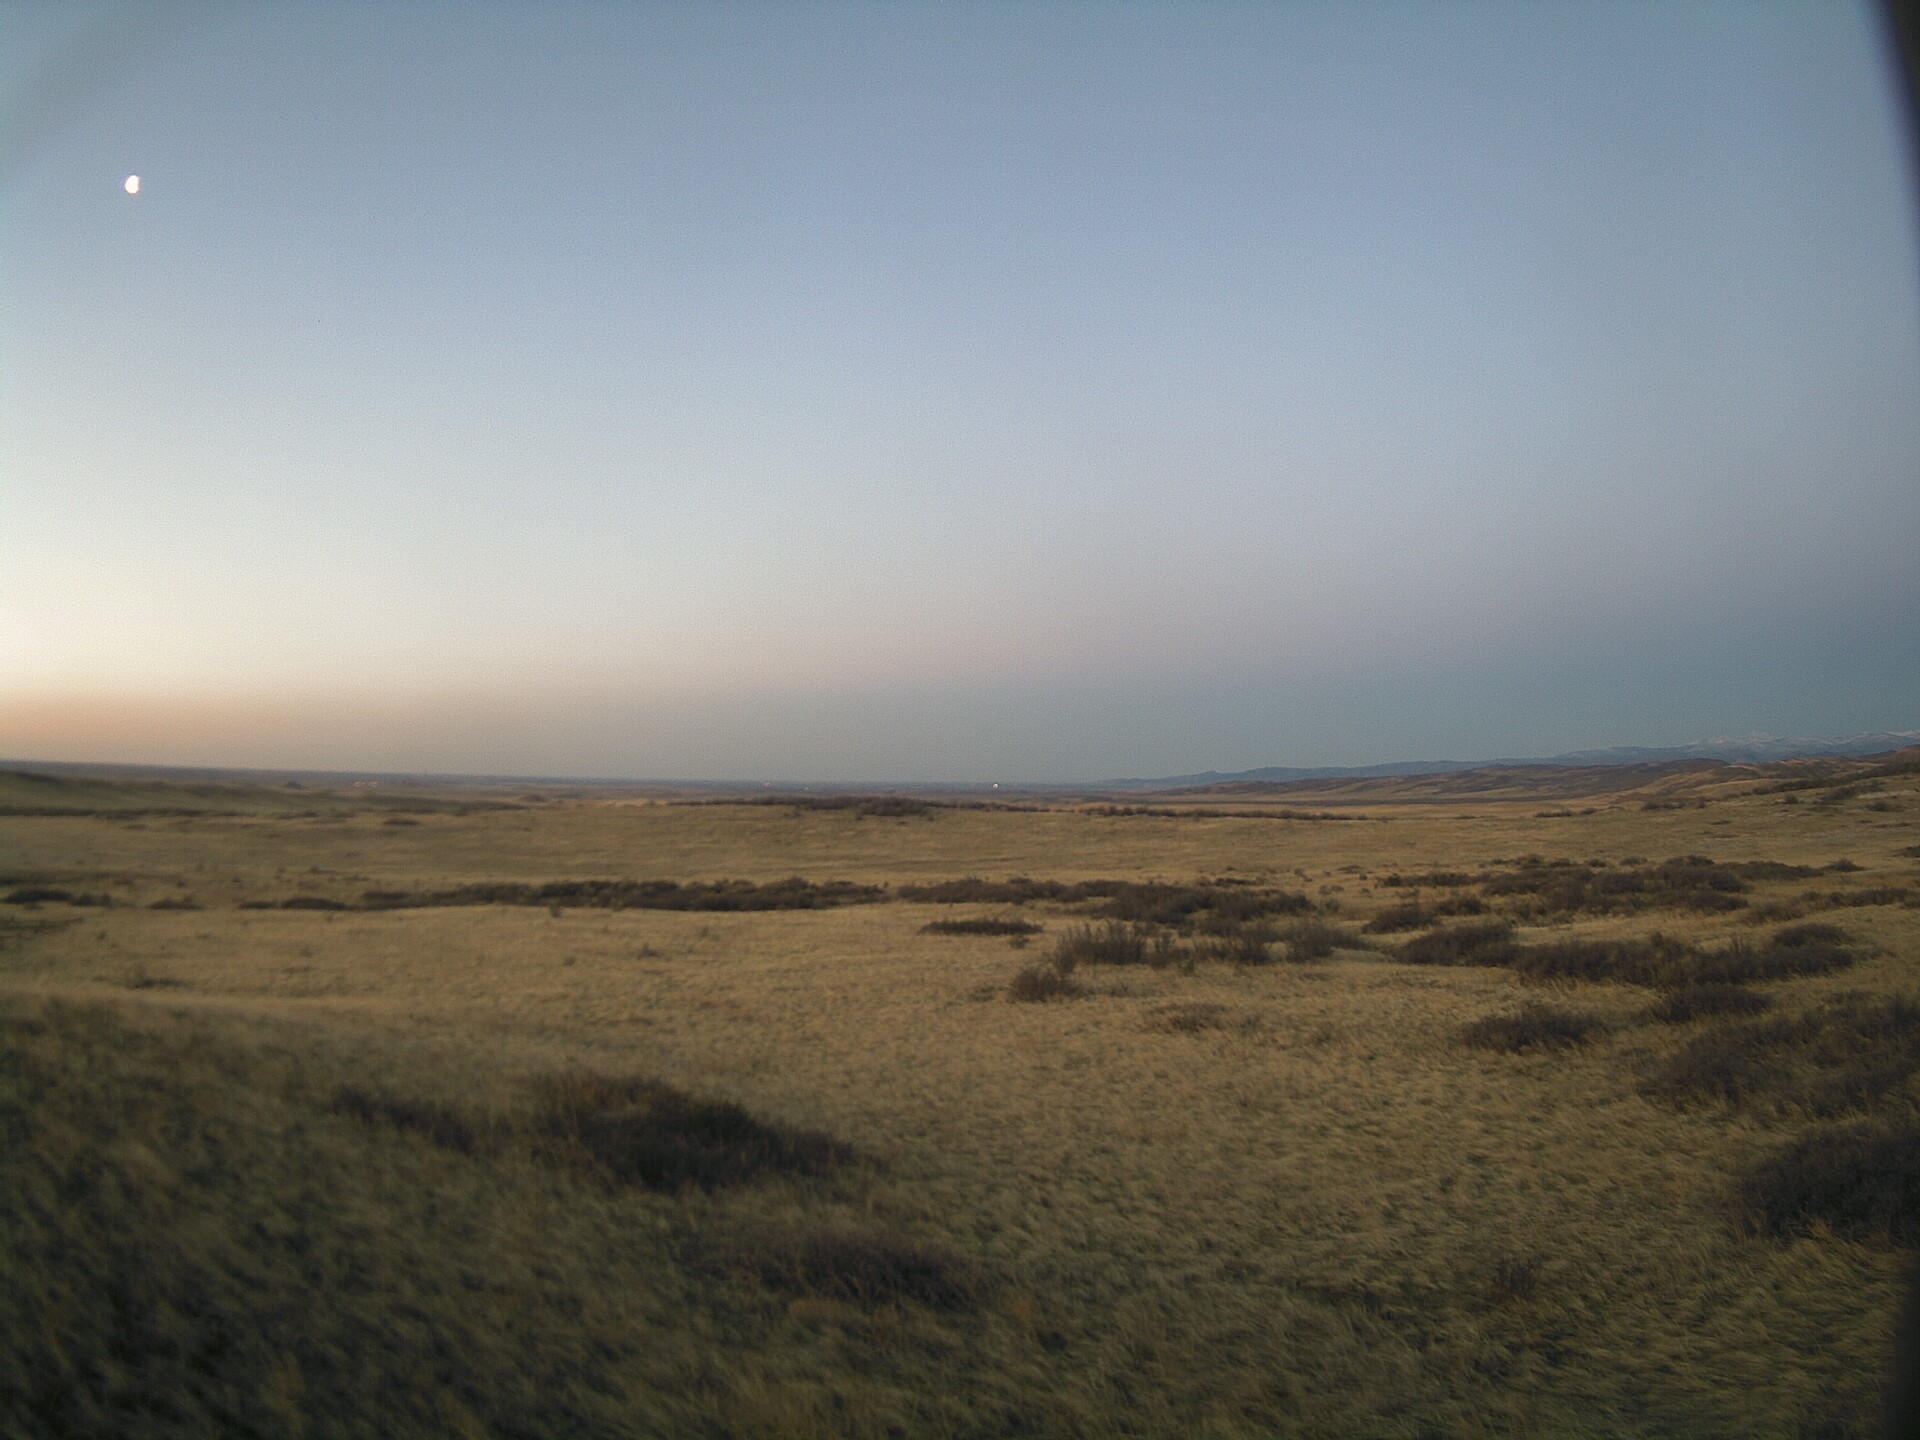 Live still image looking south from the Soapstone Prairie Natural Area